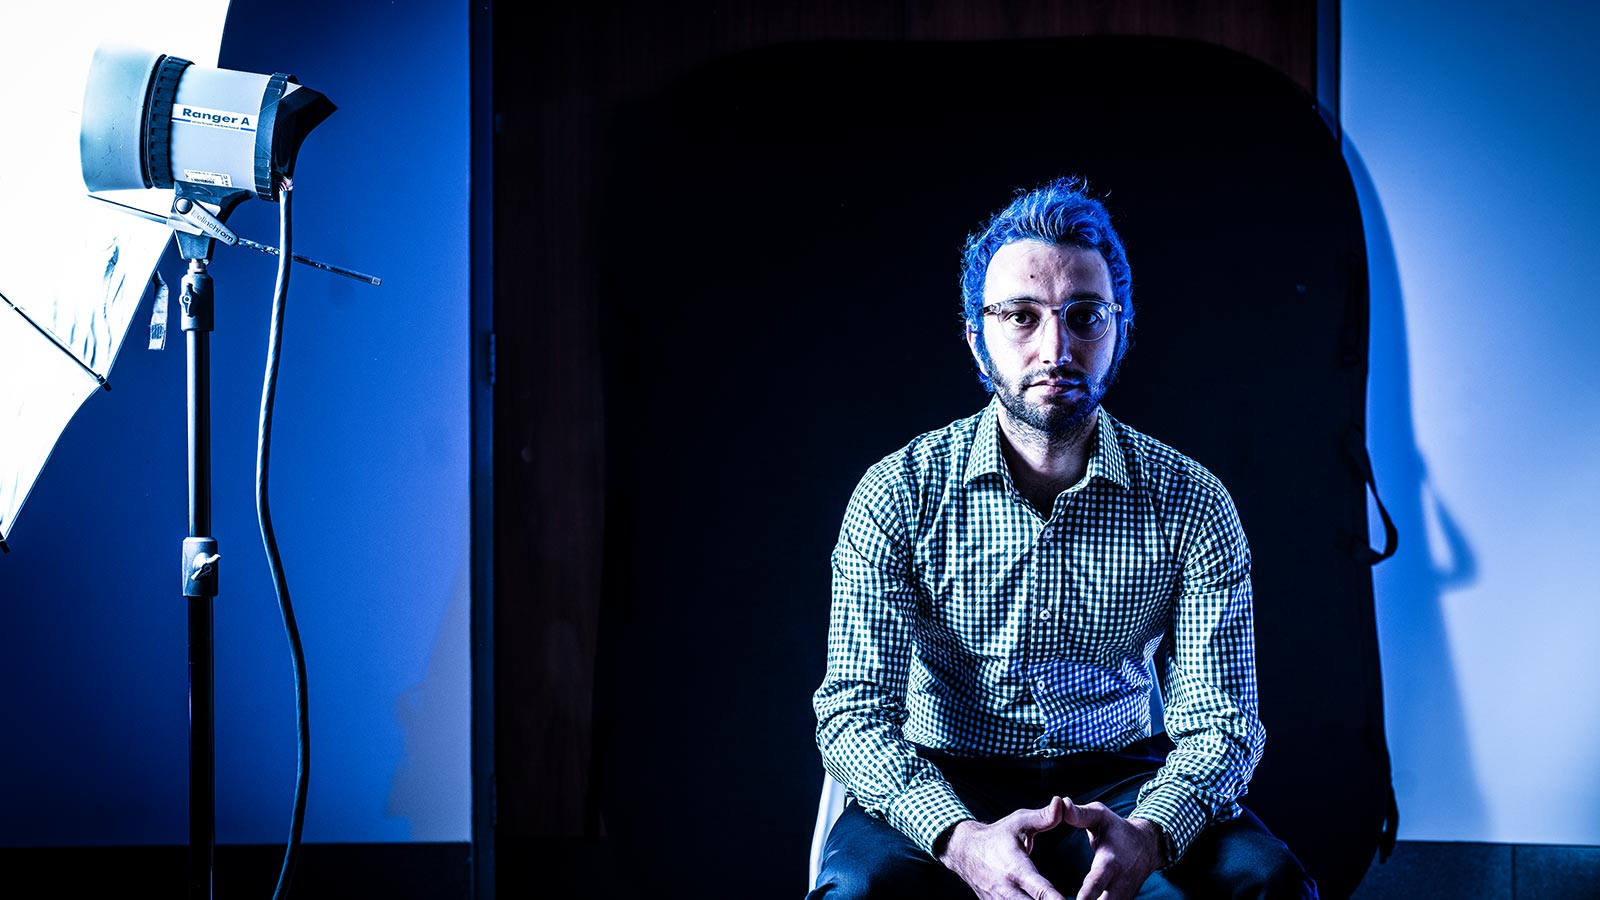 Dr Armin Alimardani has blue hair and clear glasses. He is wearing a checkered button-up shirt and sitting on a chair in a blue-lit studio. To his left is a photography flash light and umbrella.